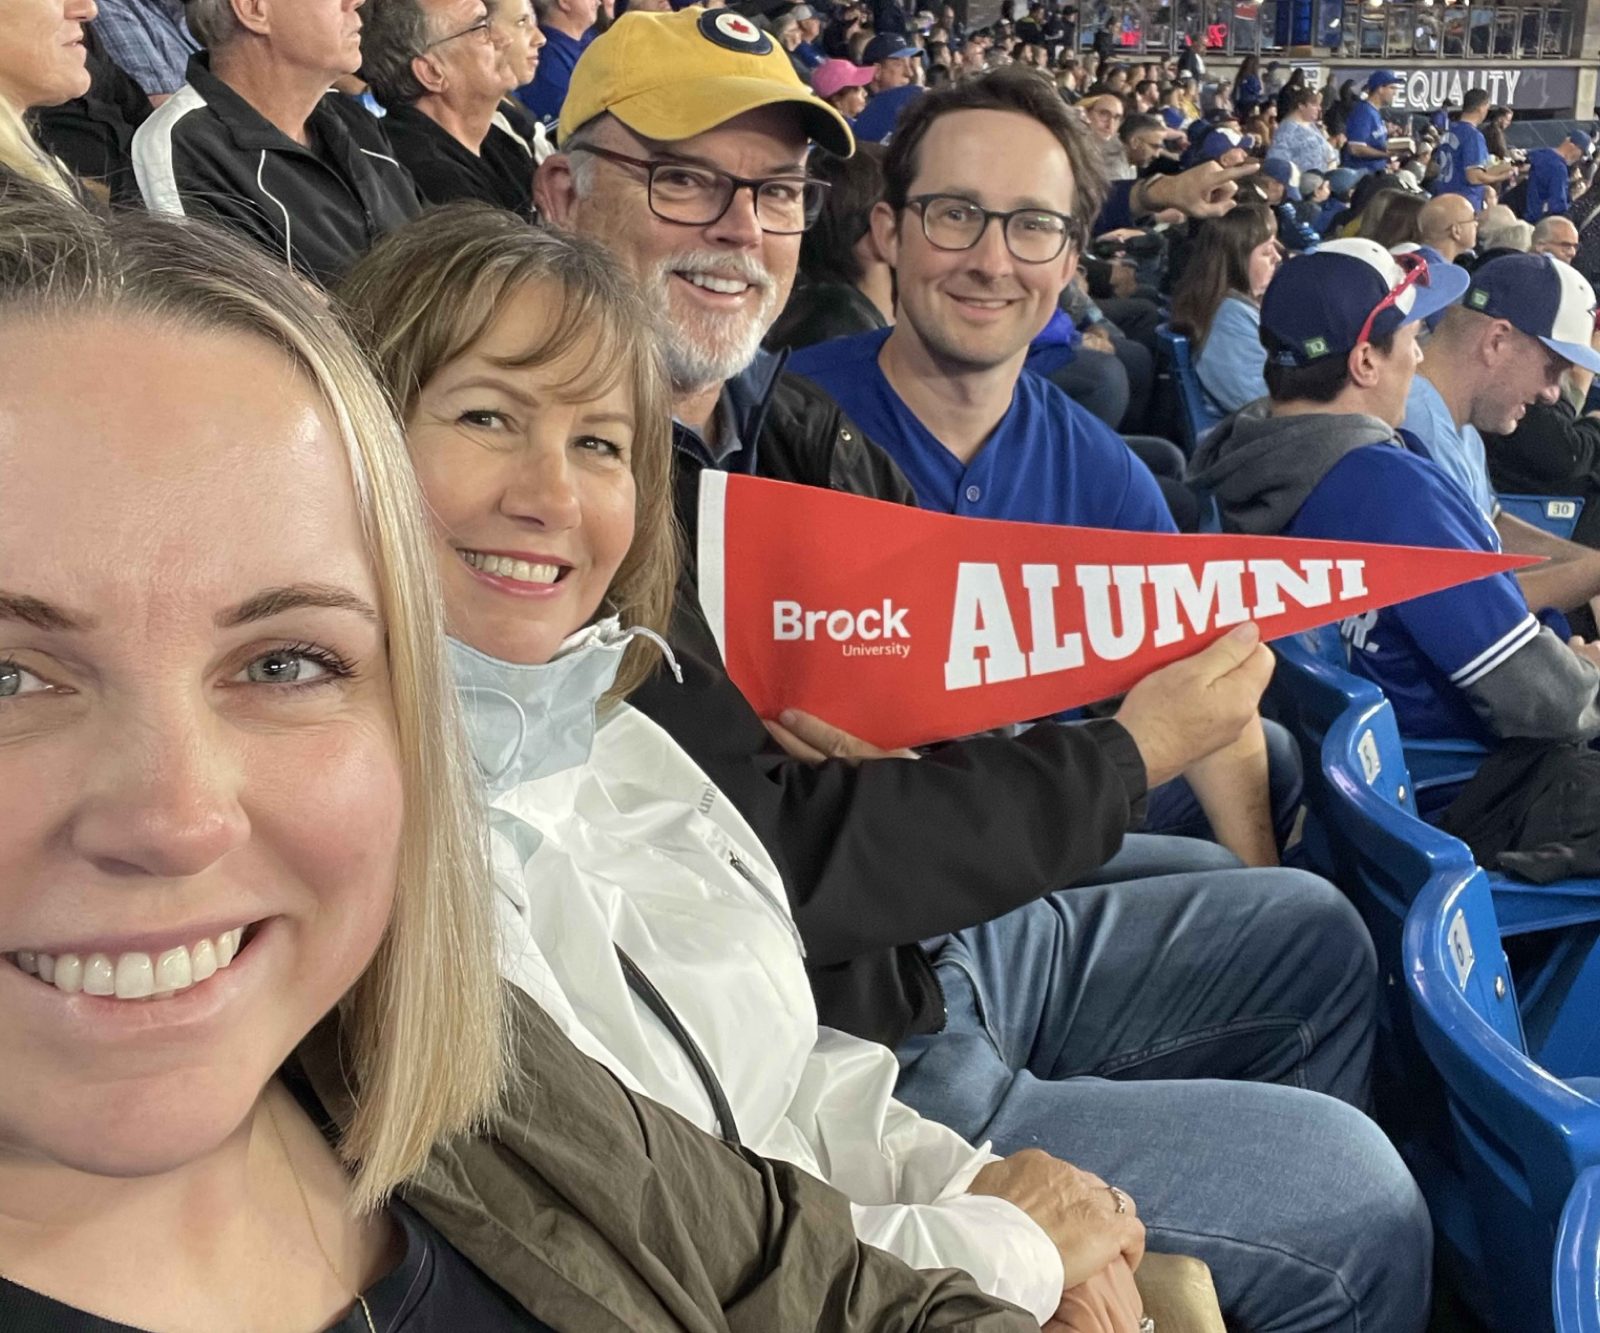 Brock Alumni Association President, Allie Hughes with family and fellow alumni at the Brock Alumni Blue Jays Game in Toronto.